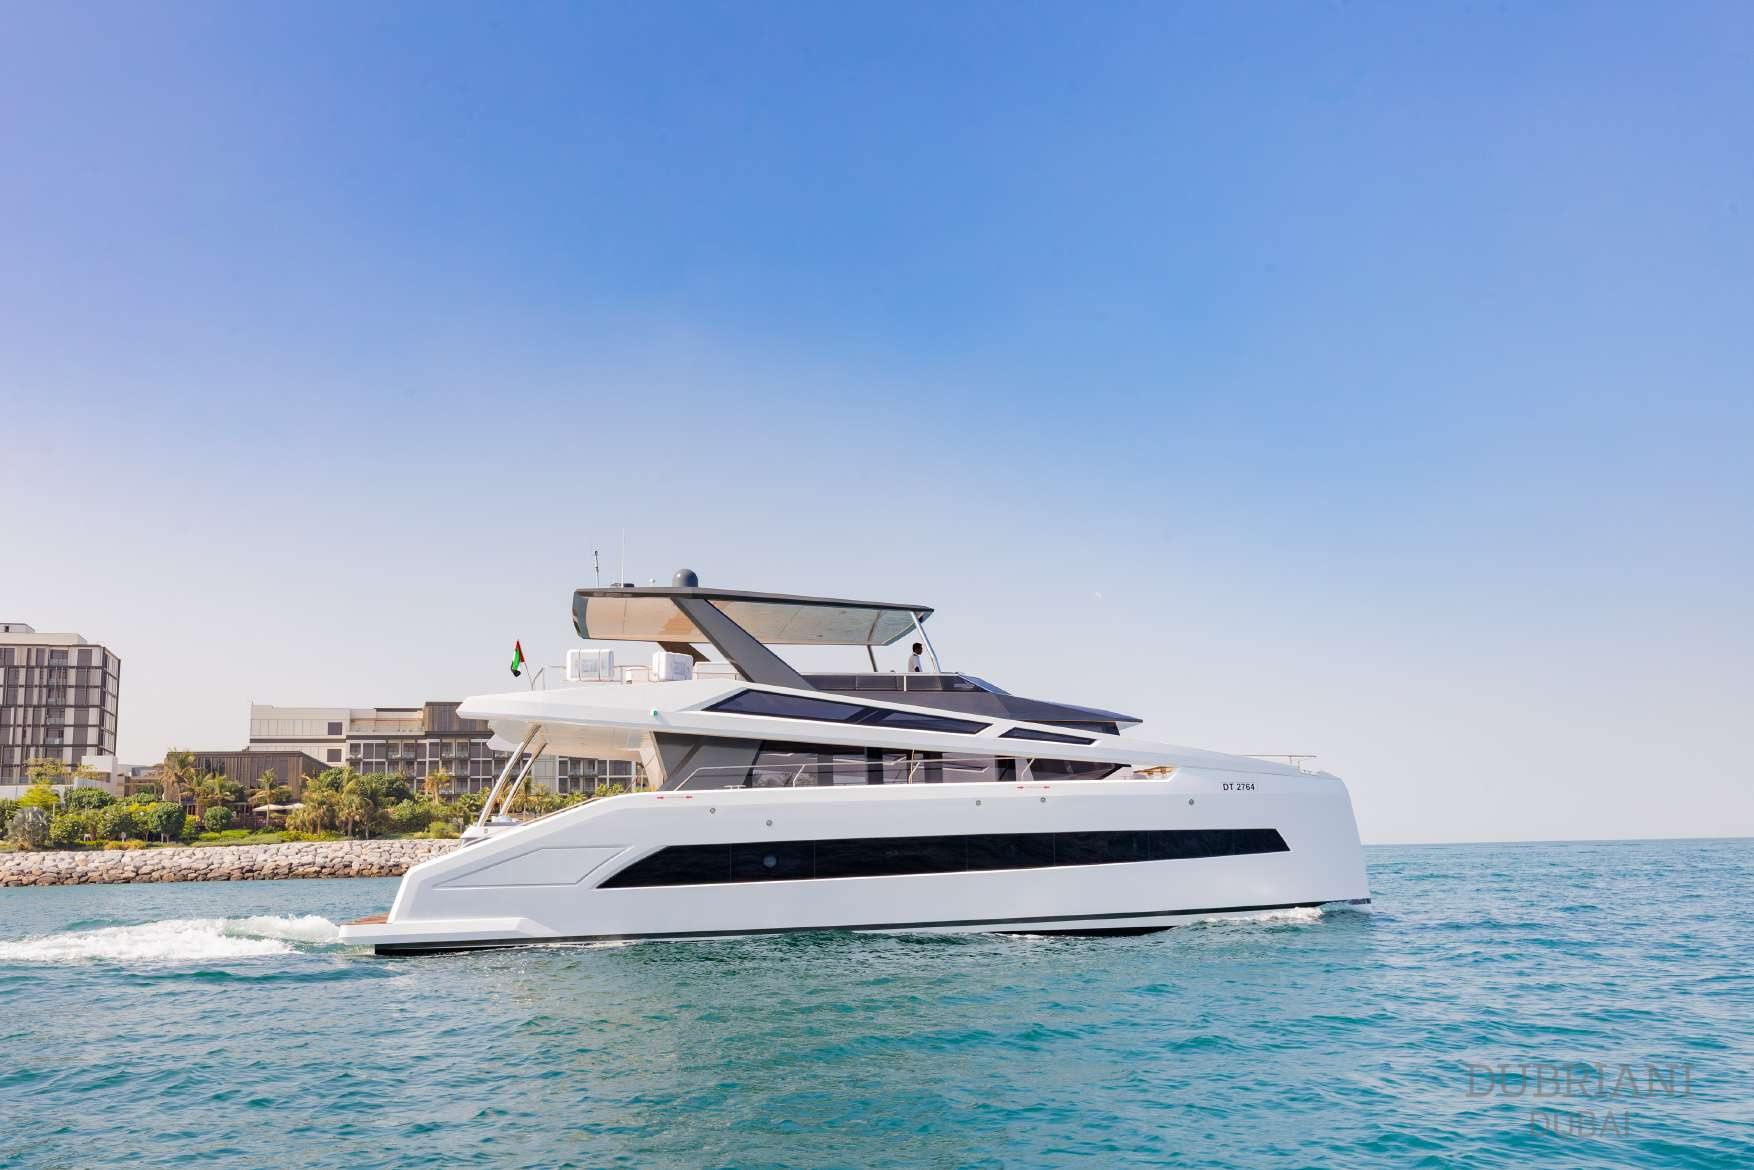 Discover our exclusive catamaran yacht images in Dubai. Book this unforgettable experience for 45 guests.